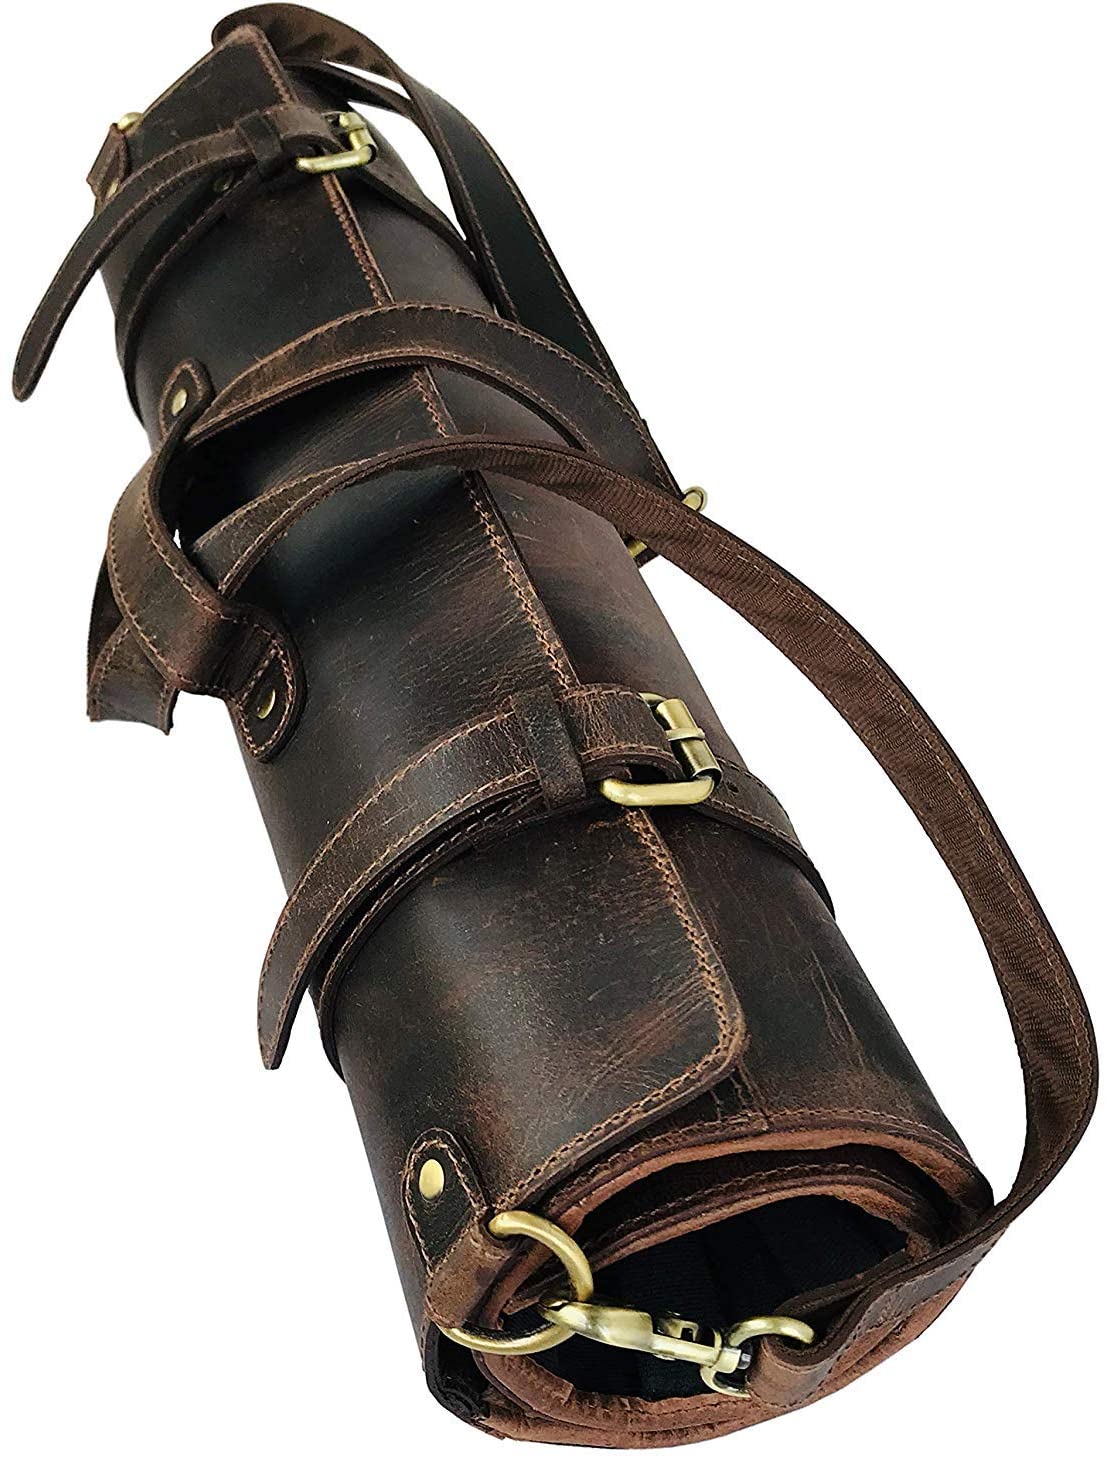 RUSTIC TOWN Leather Knife Roll Storage Bag | Elastic and Expandable 11  Pockets with Tool Pouch | Adjustable/Detachable Shoulder Strap 